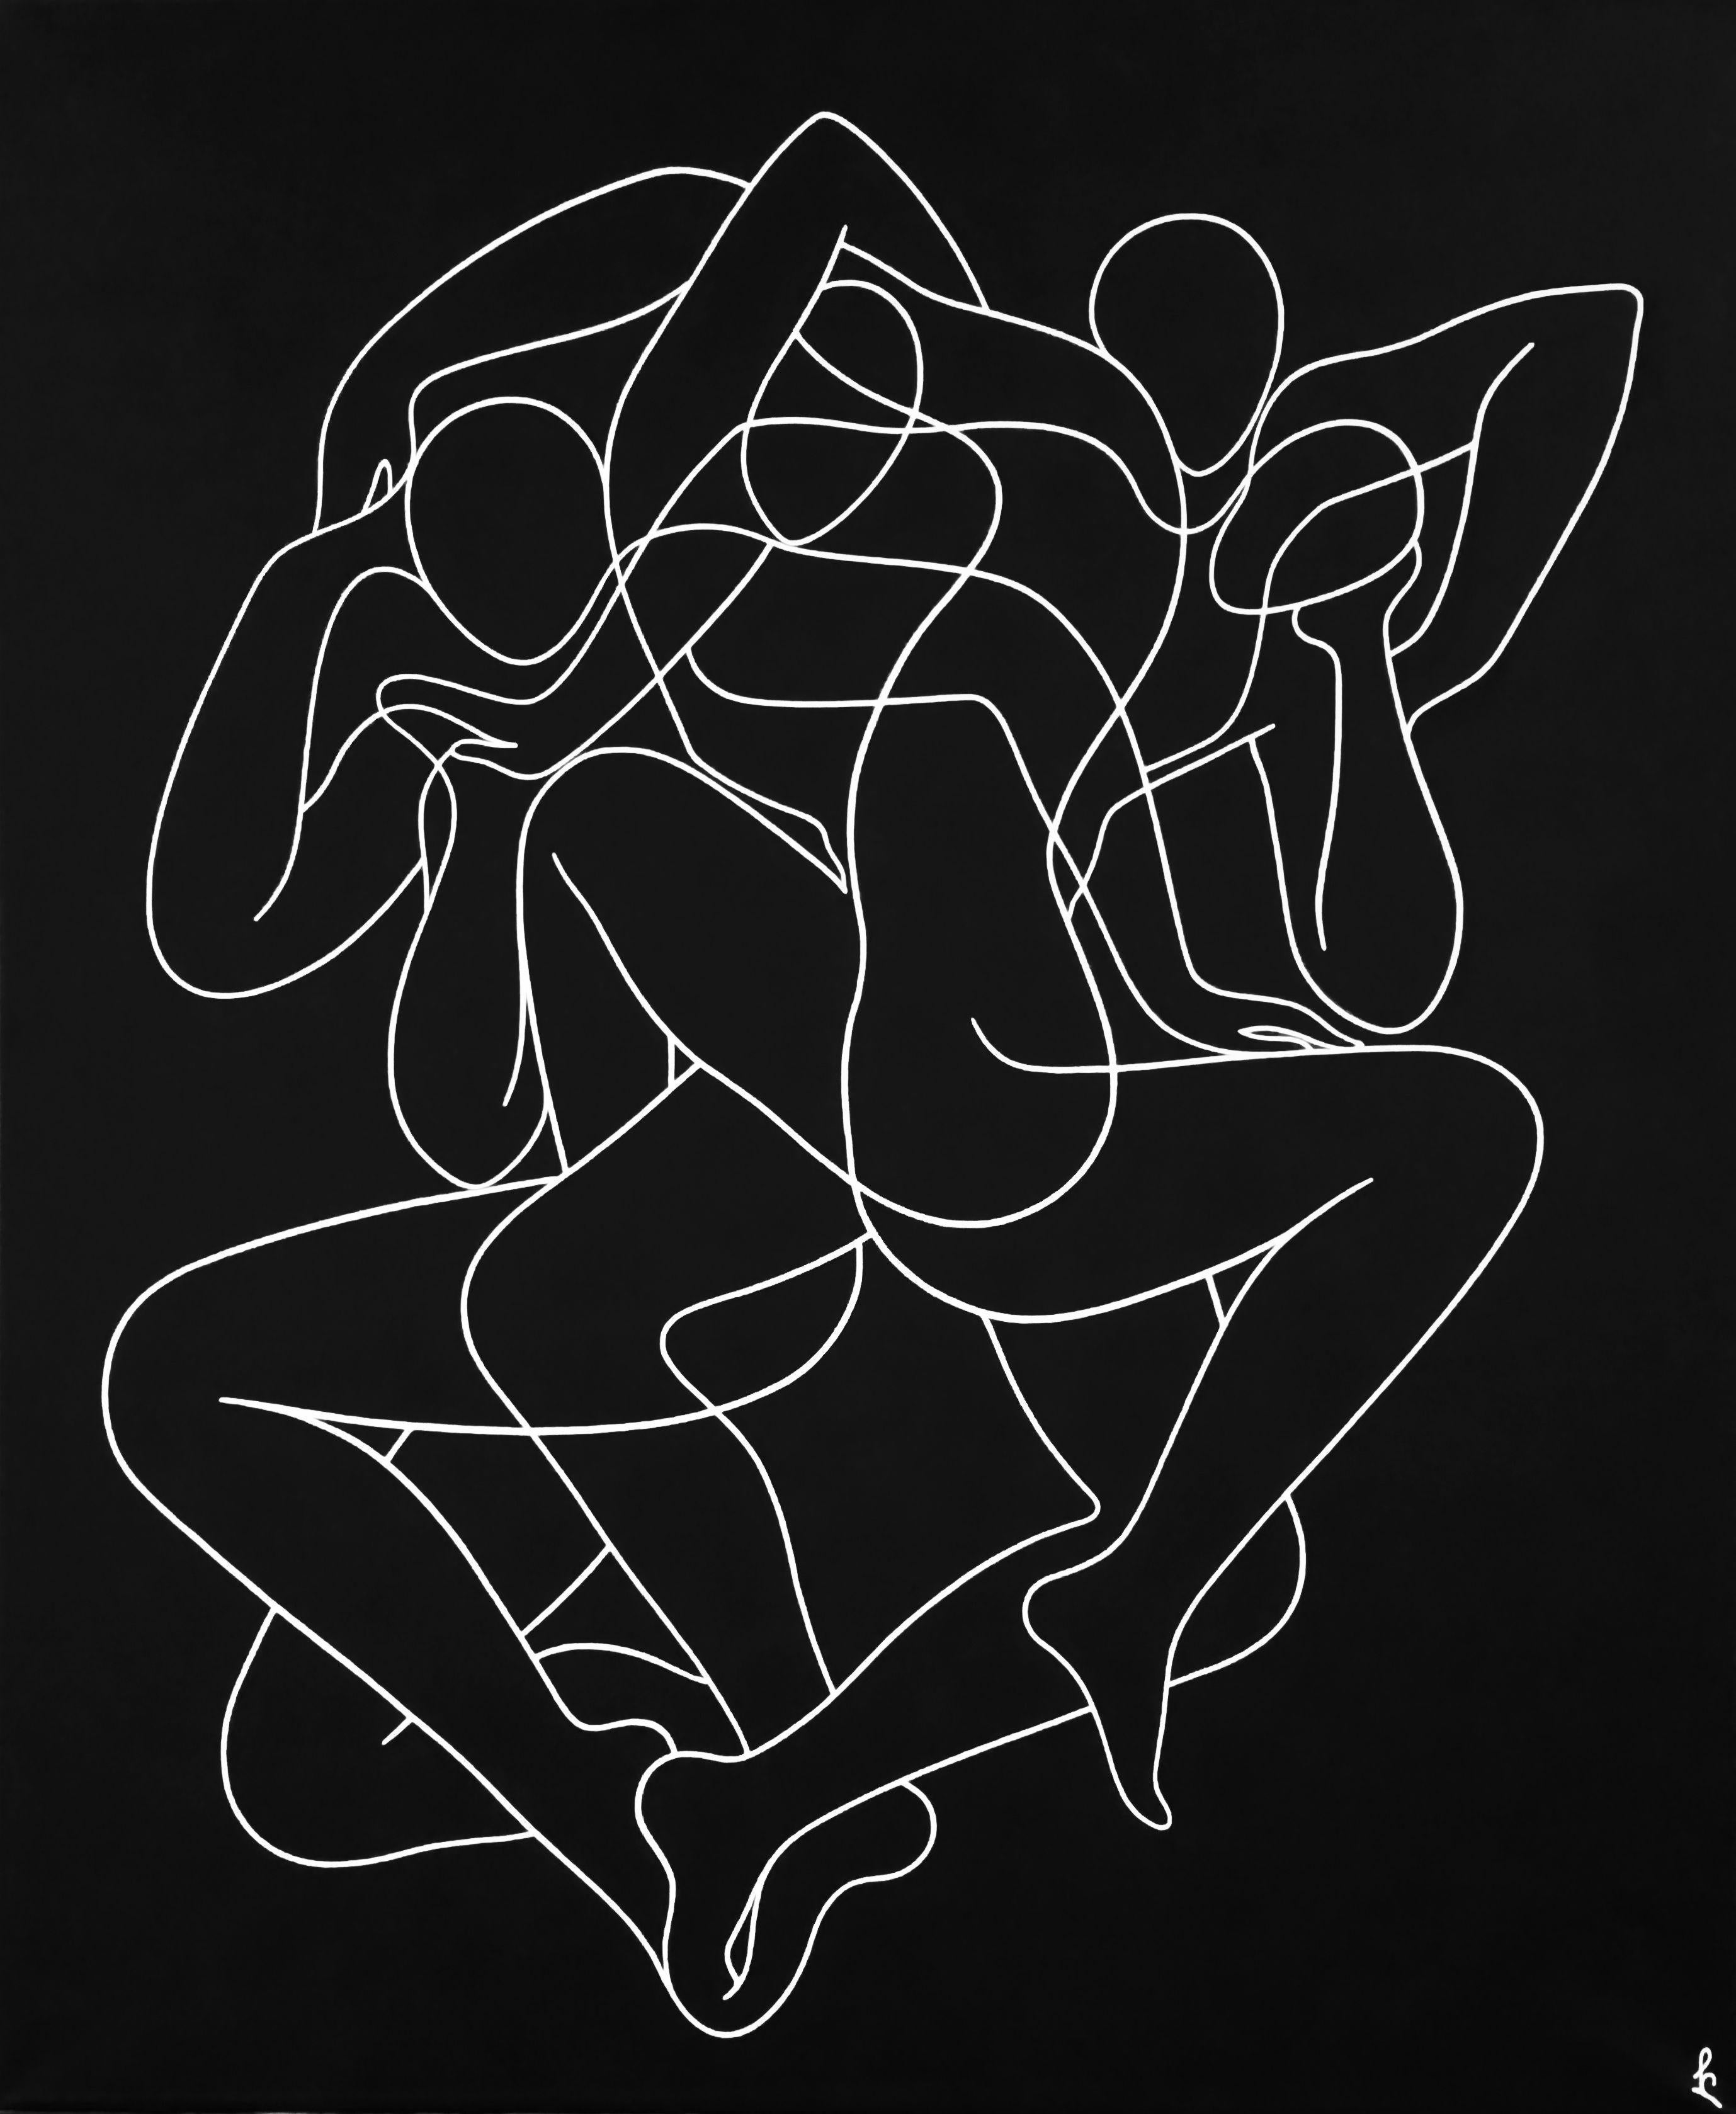 I love to create multi-figure compositions, with interlaced human figures, with interplay, interactions and transformations of human forms, with people dancing in a weightless and boundless space. I use simple line for delivering my ideas in a